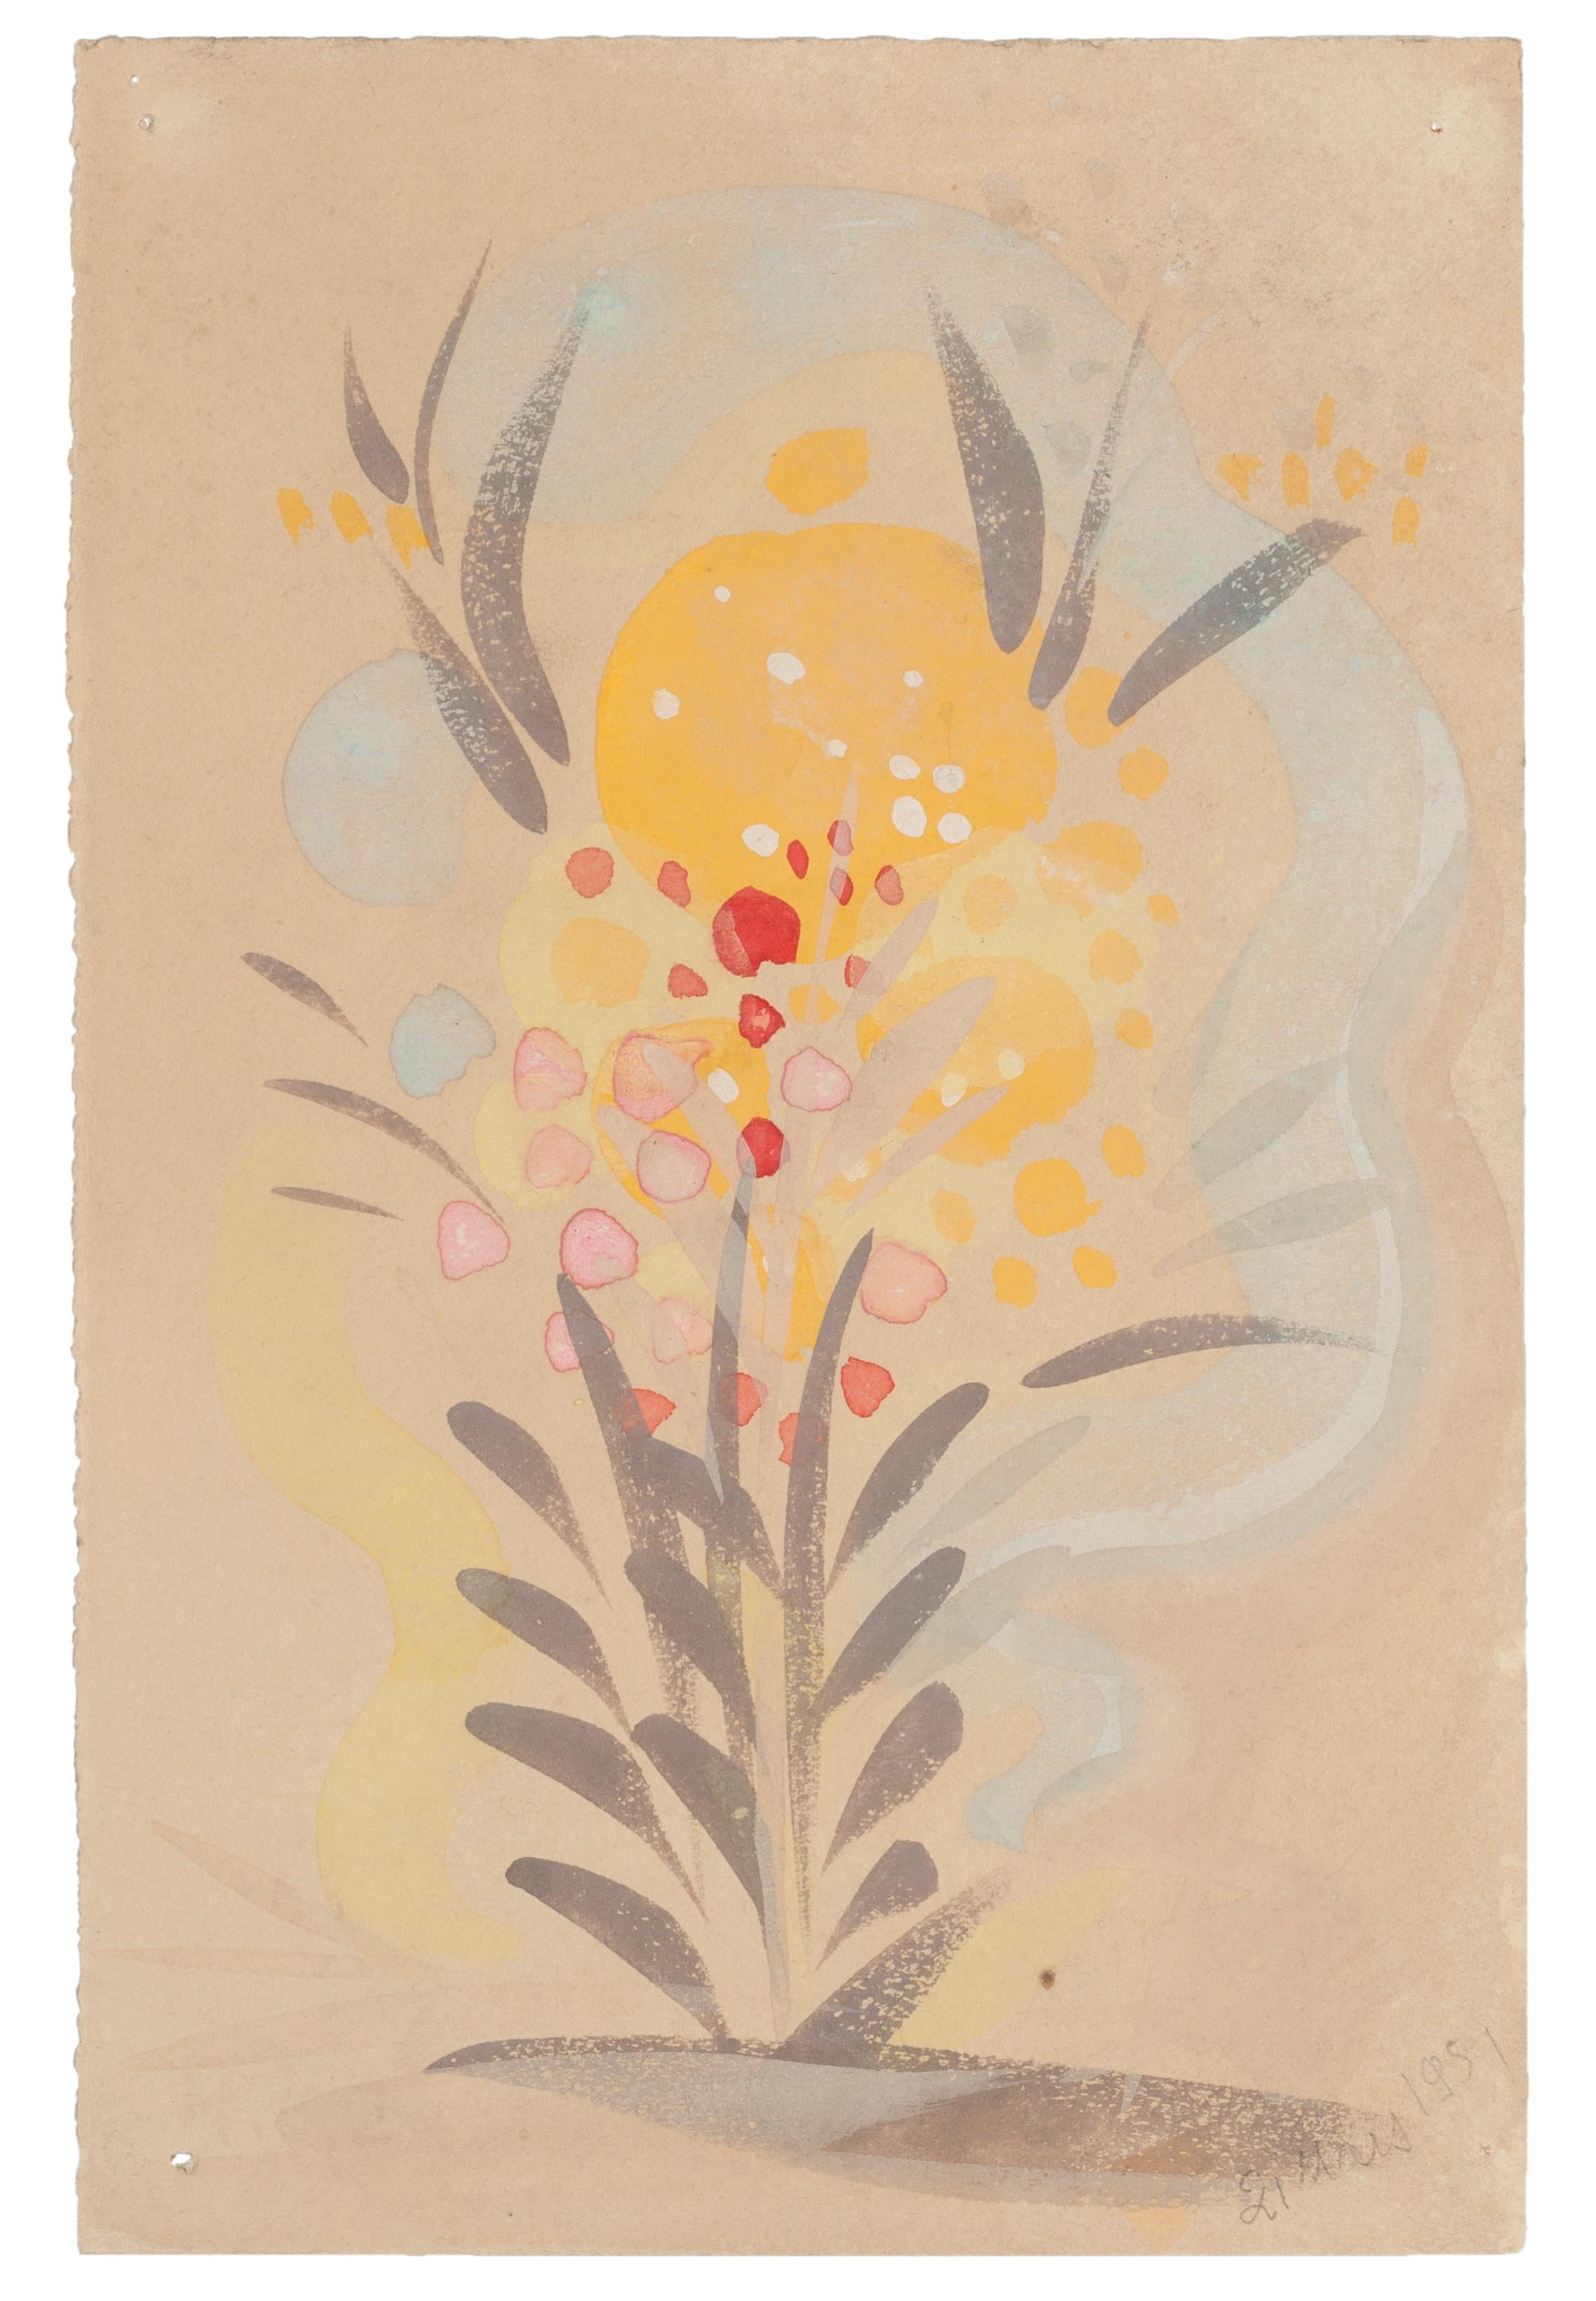 Composition of Flowers 1951  is an original drawing in watercolor on paper, realized by Jean Delpech (1988-1916). 

Sheet dimension: 24.1 x 16 cm.

The artwork represents beautiful composition of flowers, with vivid color, joyfully created, through